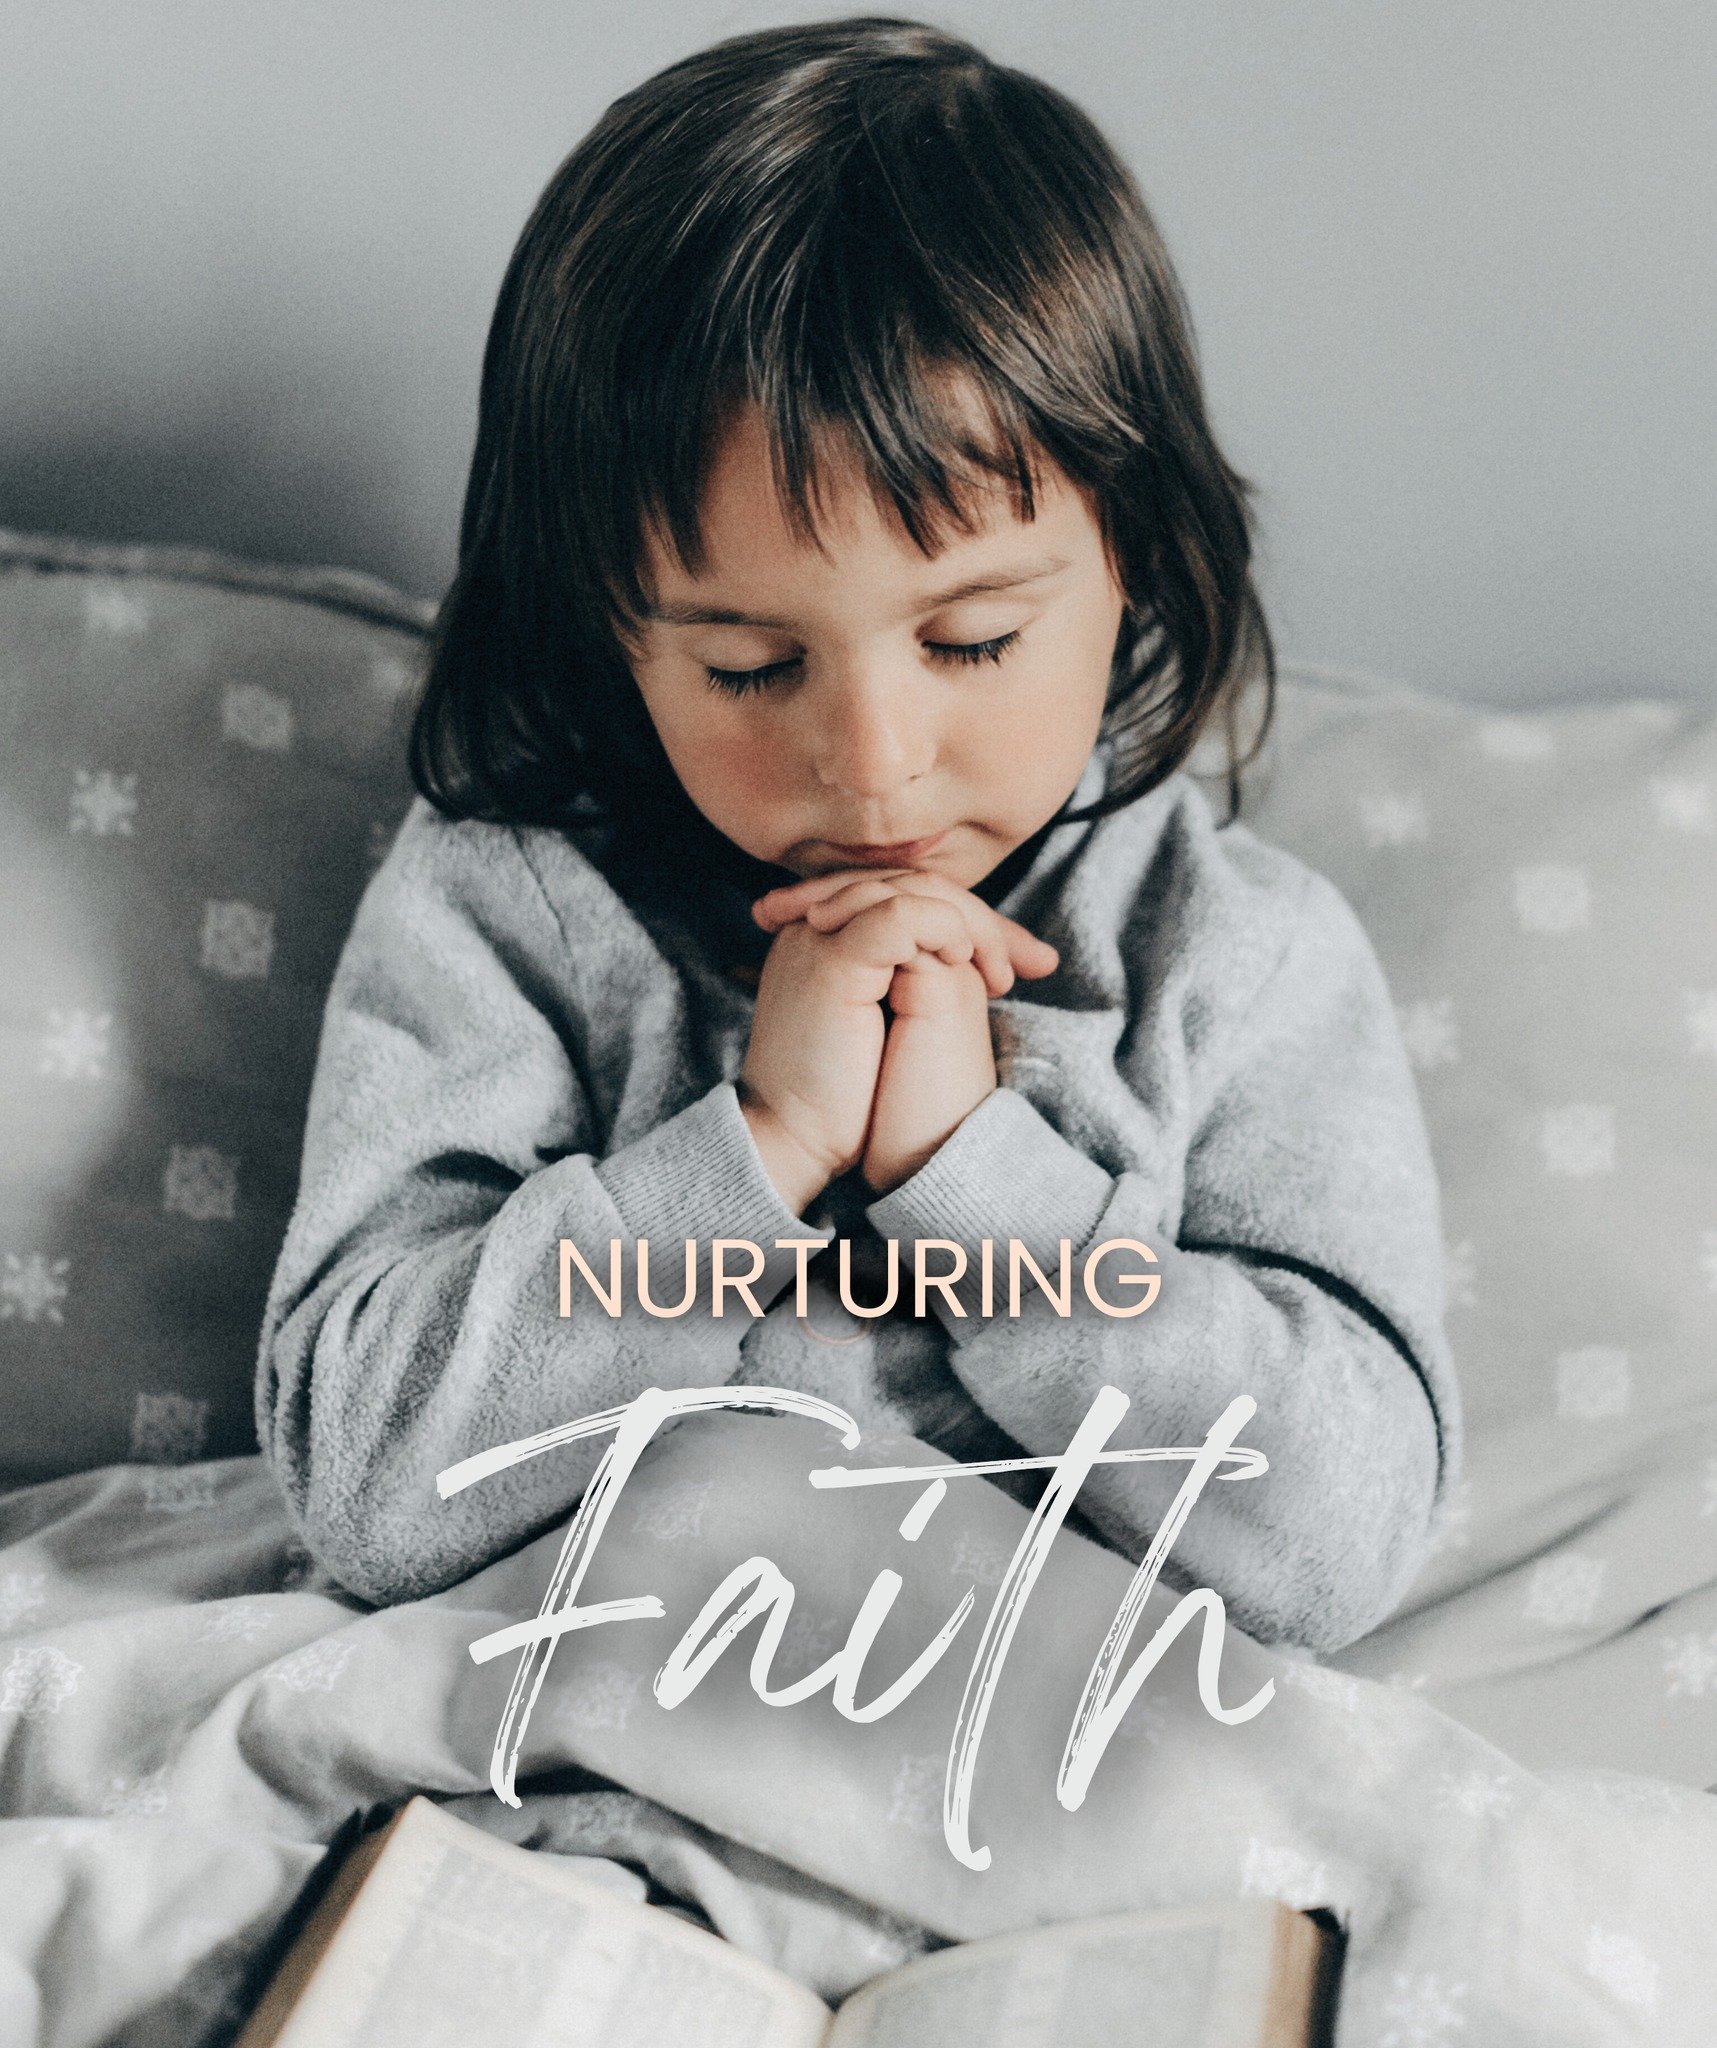 5 Prayers for Adopted Children:

&quot;As an adopted child from Bucharest, Romania, my journey into the arms of a loving family through adoption has shaped my understanding of the power of faith. Adopted at two years old, I could not have comprehende